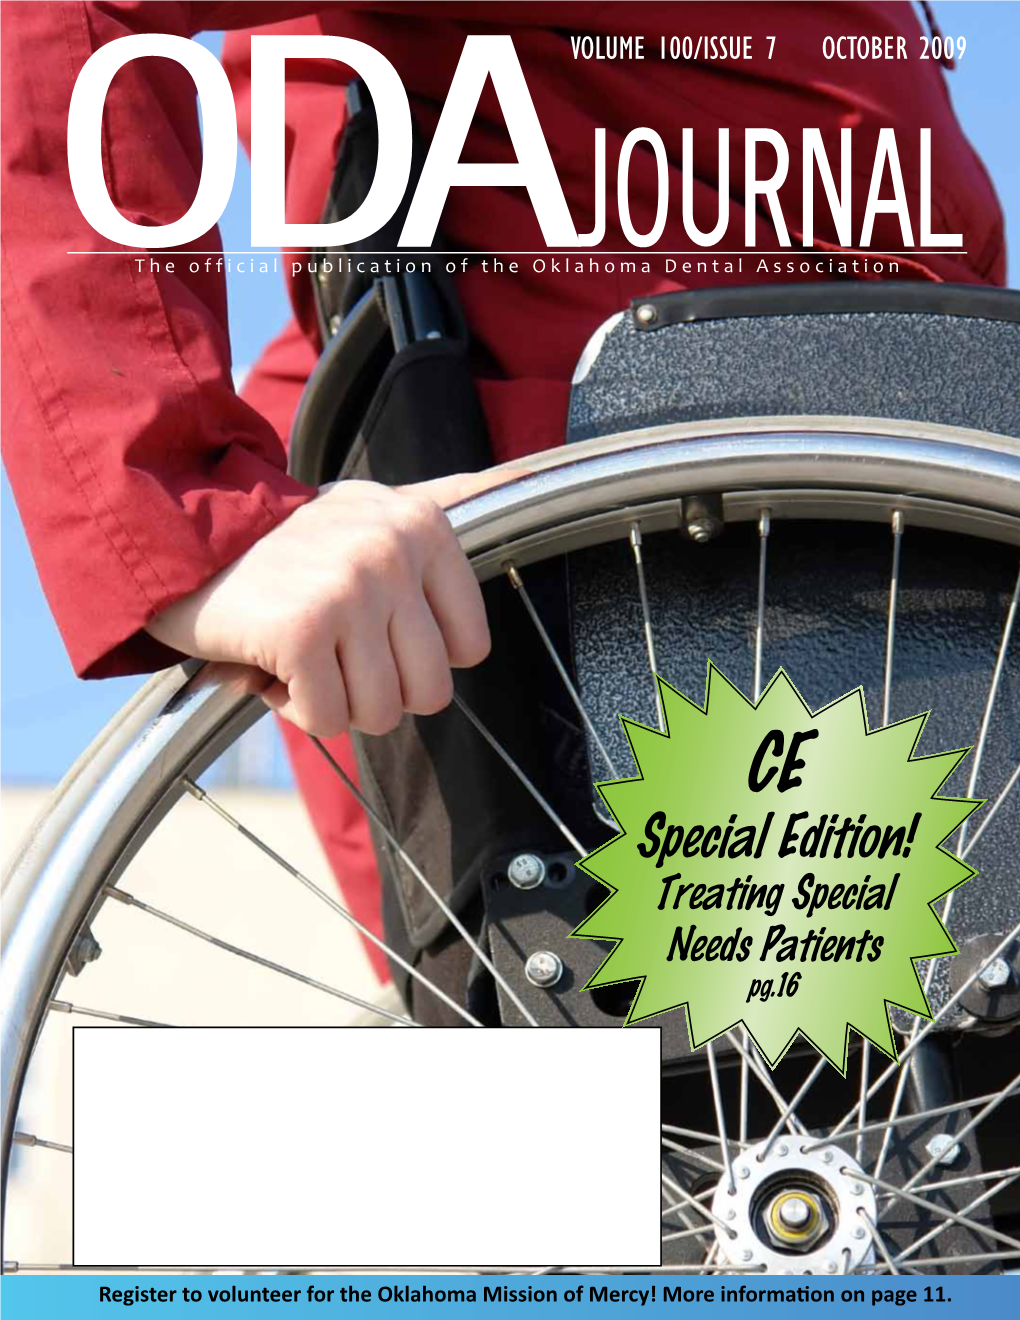 Special Edition! Treating Special Needs Patients Pg.16